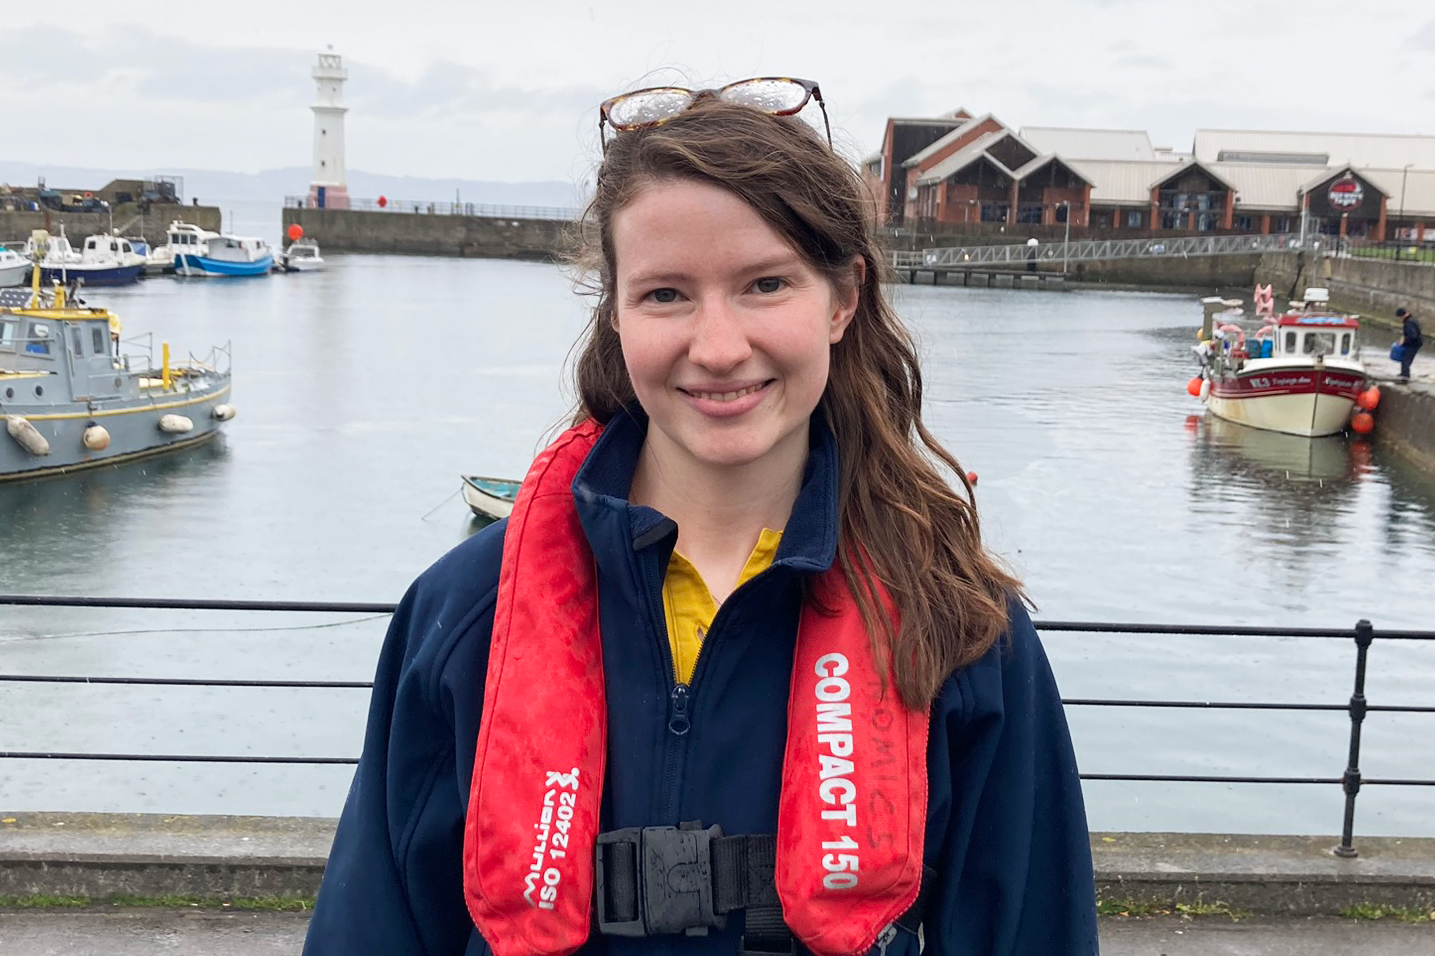 Field Researcher Felicity at a harbour in front of fishing boats.